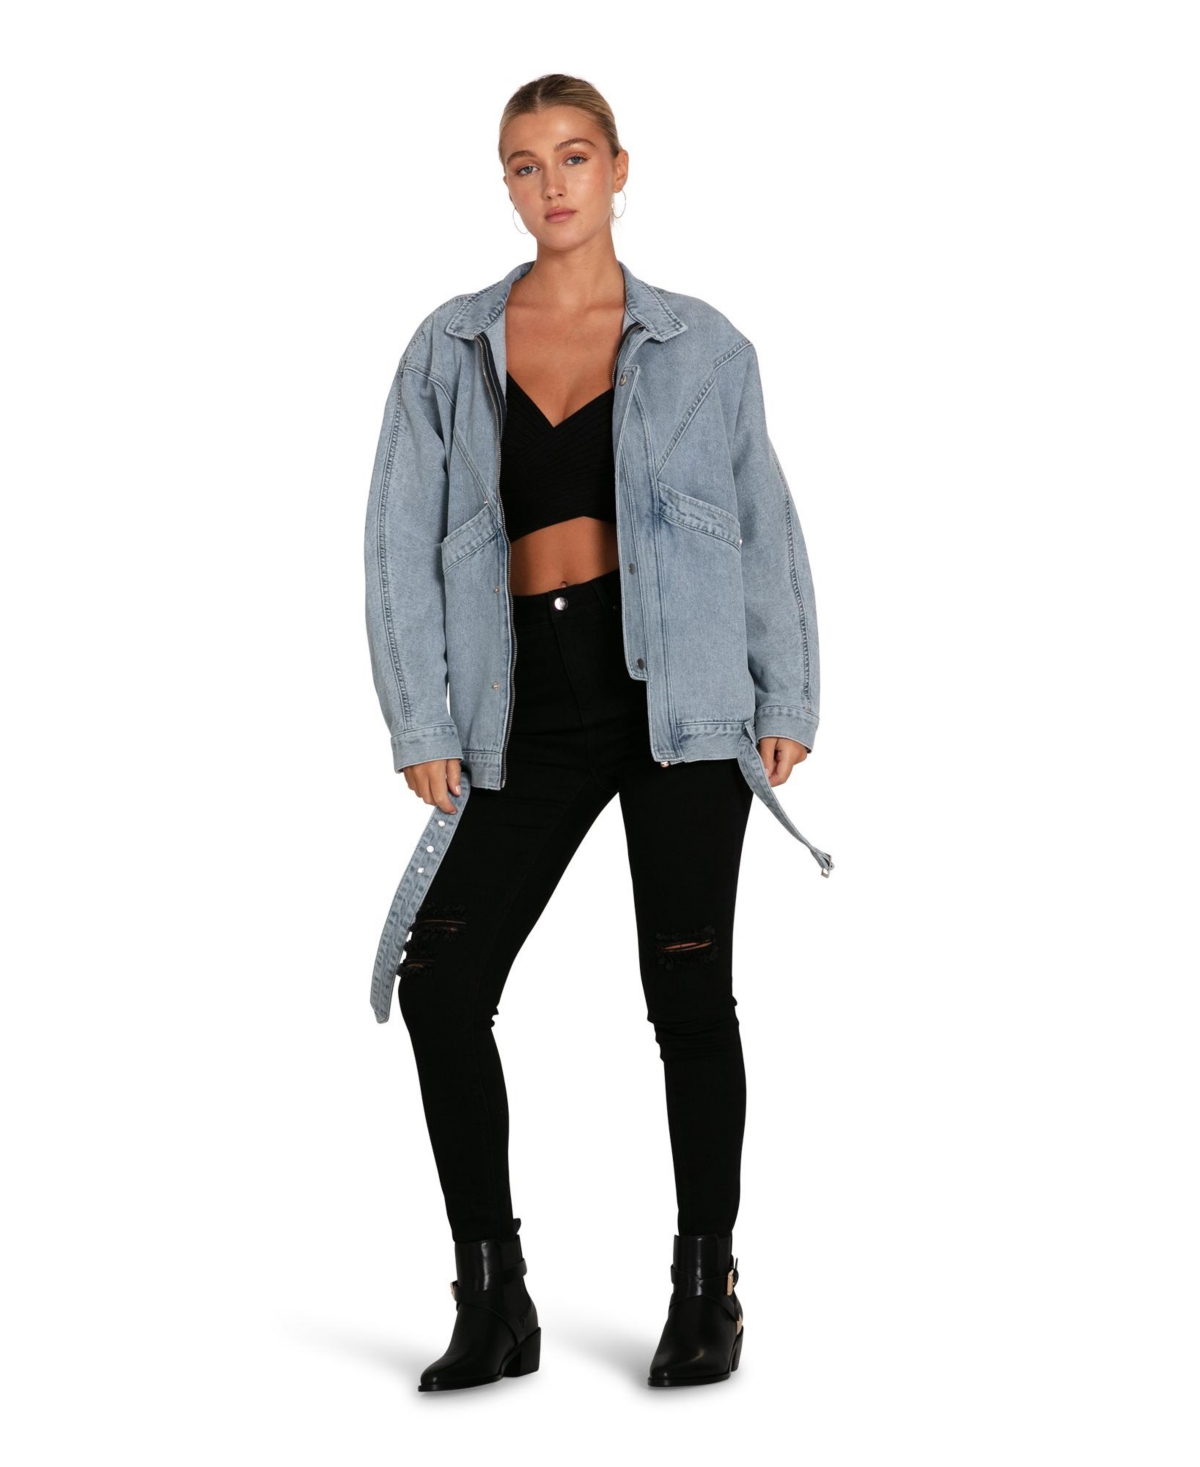 Women's All About You Denim Jacket - Blue